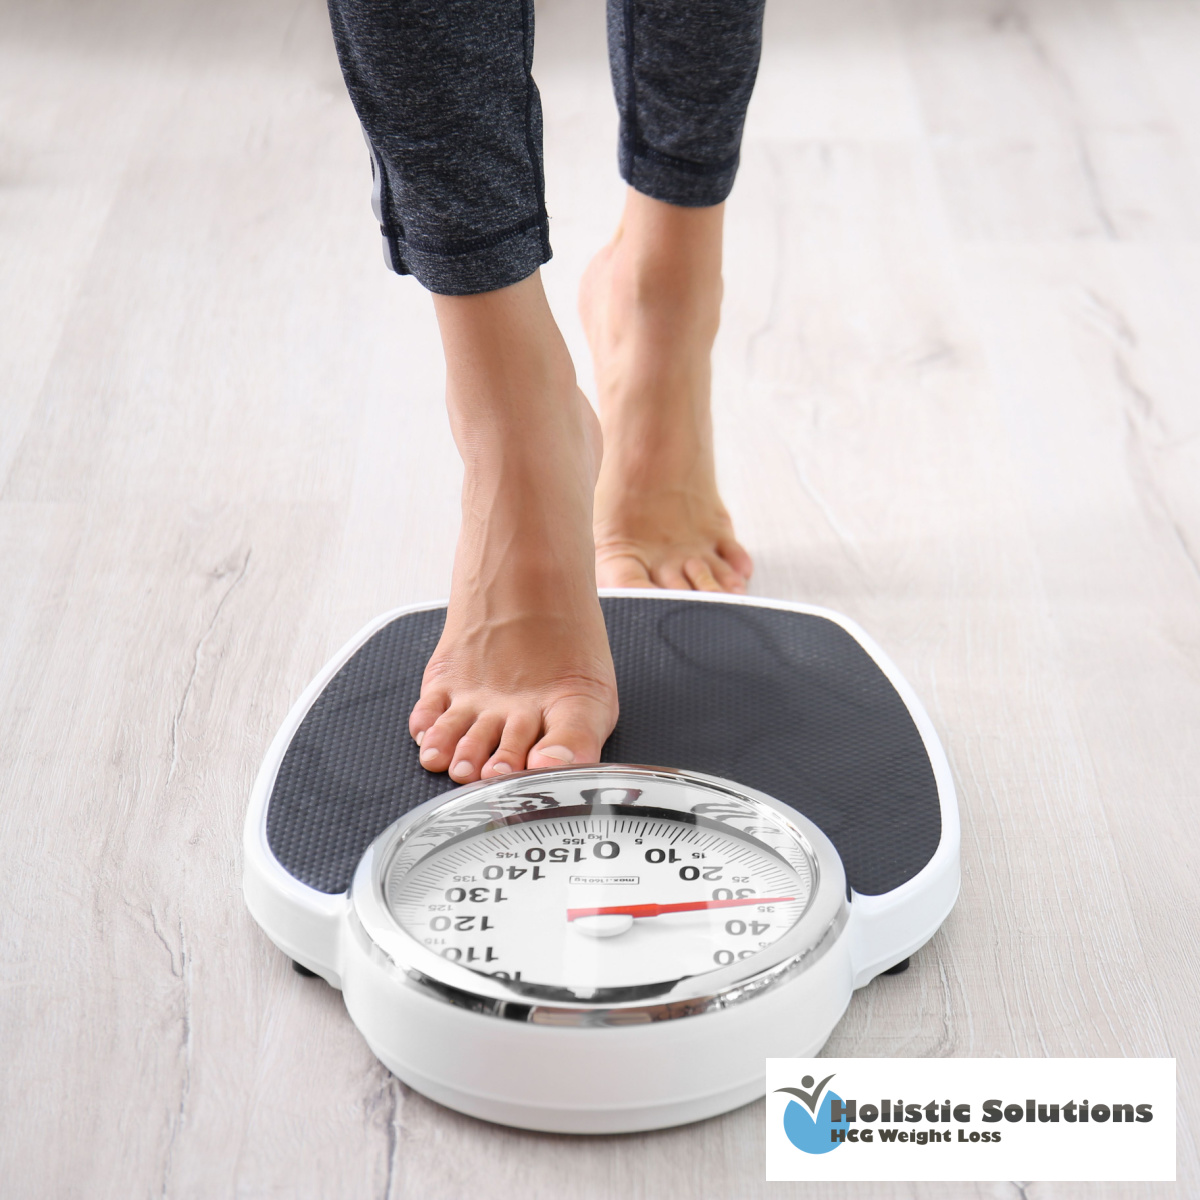 Getting Started With An HCG Weight Loss Doctor Near Sunnyvale